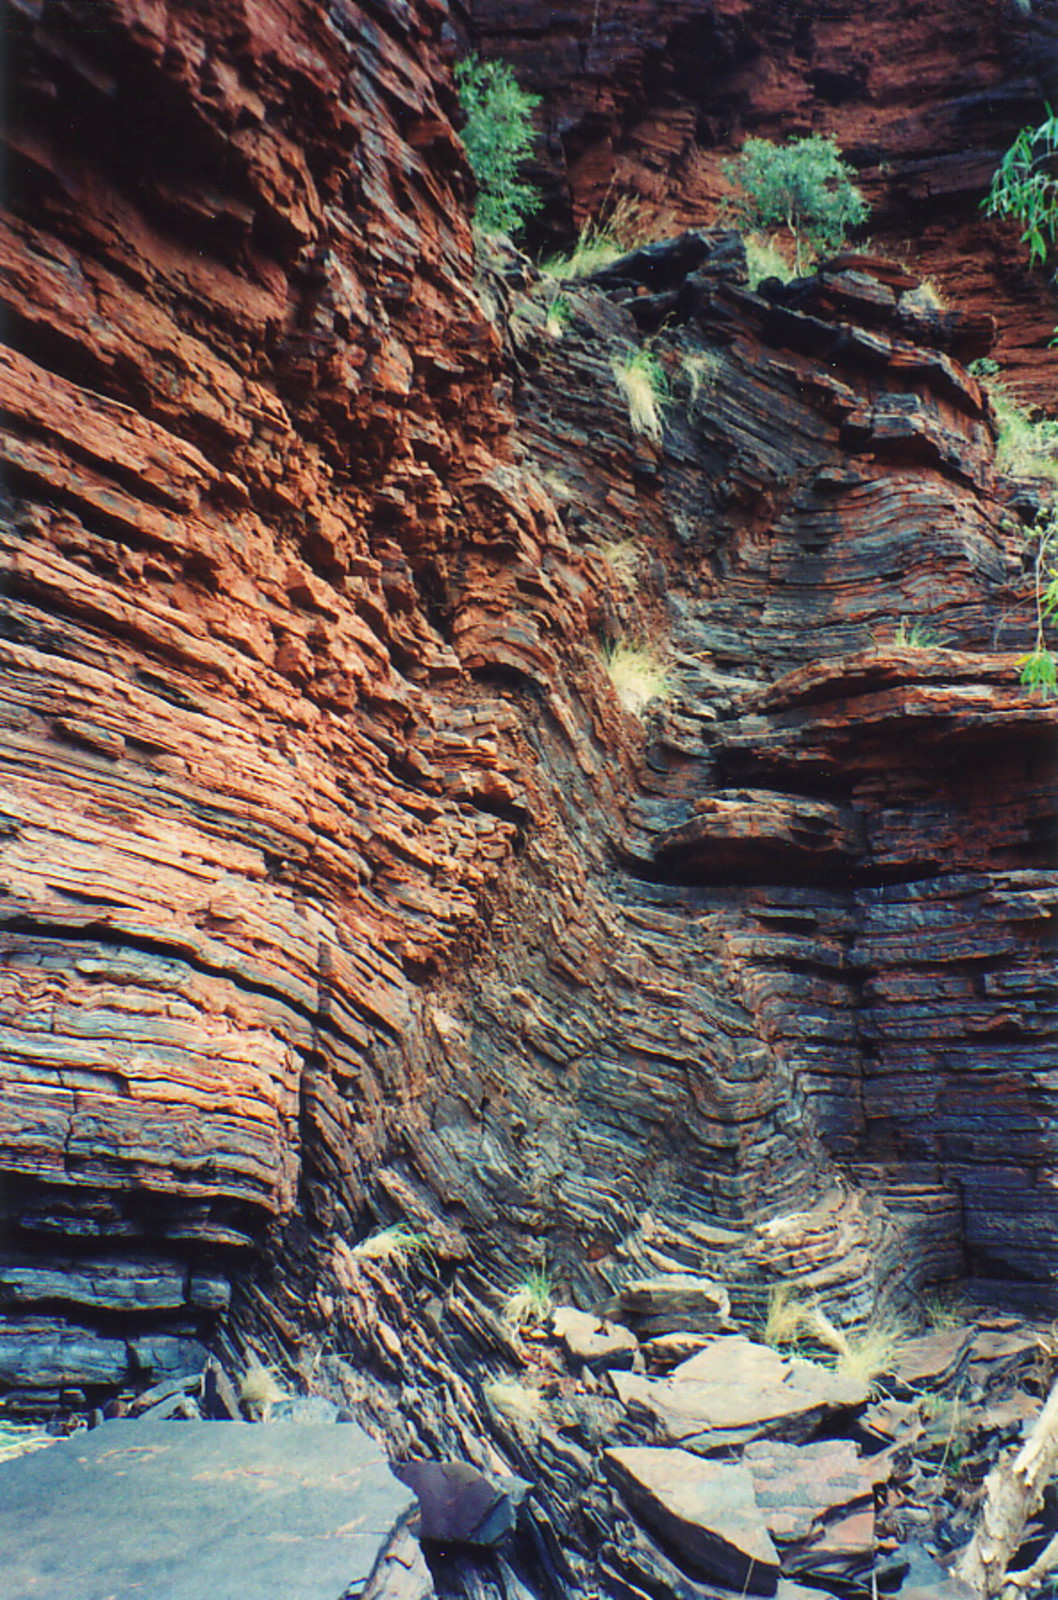 Buckled rock in one of Karijini's gorges